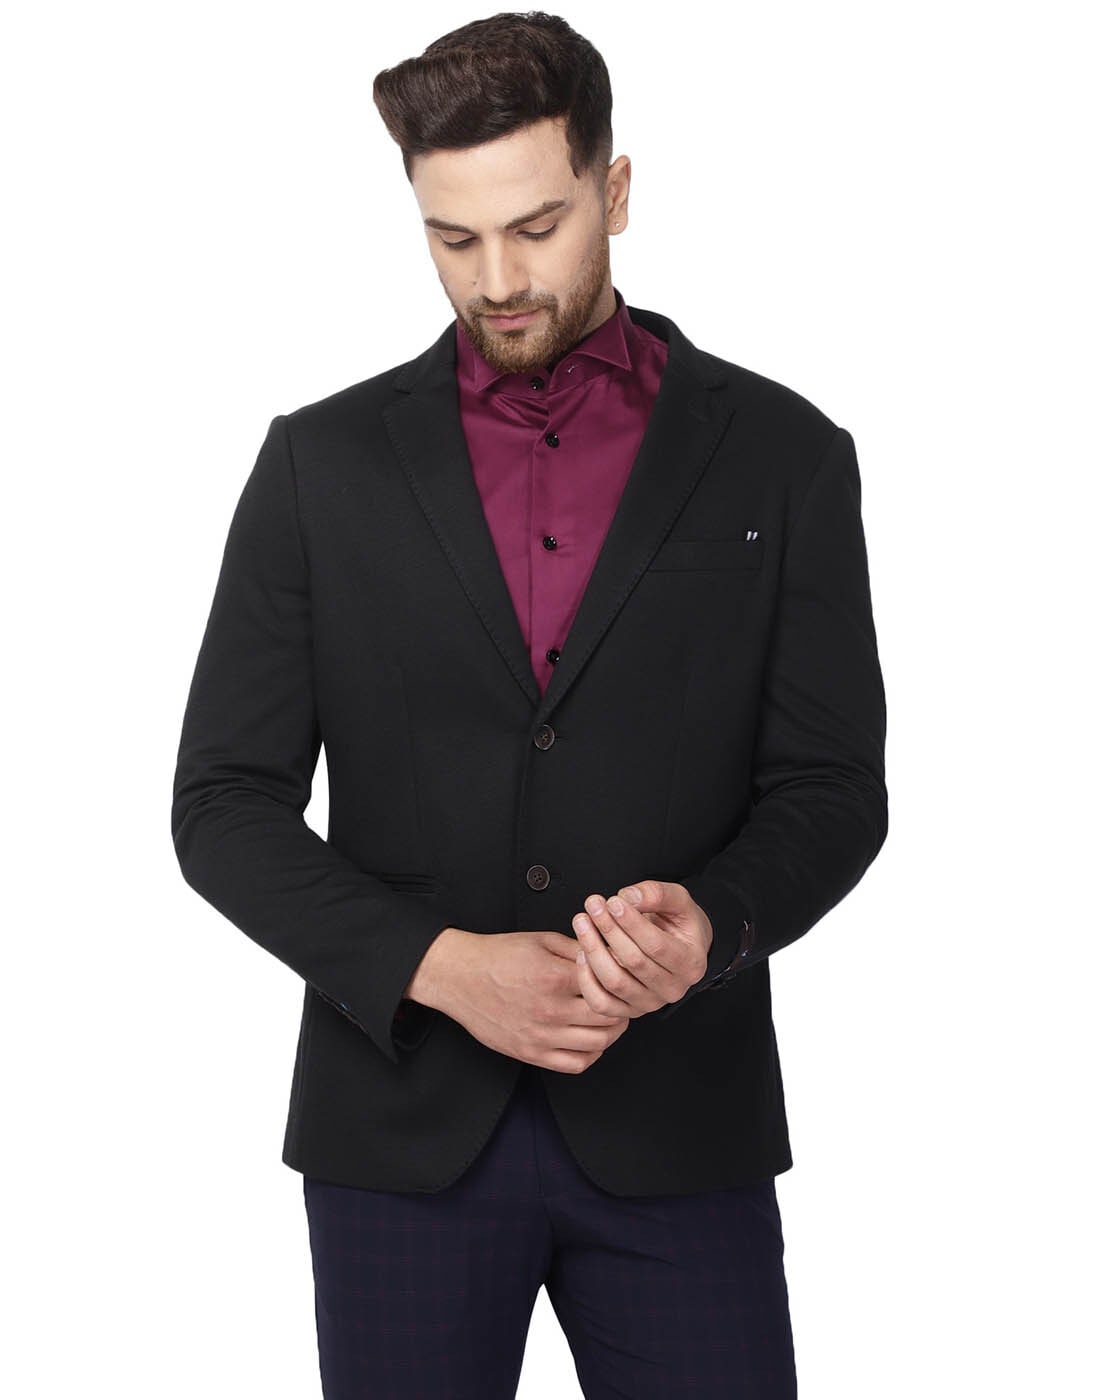 Black Blazer with Navy Dress Pants Outfits For Men (23 ideas & outfits) |  Lookastic